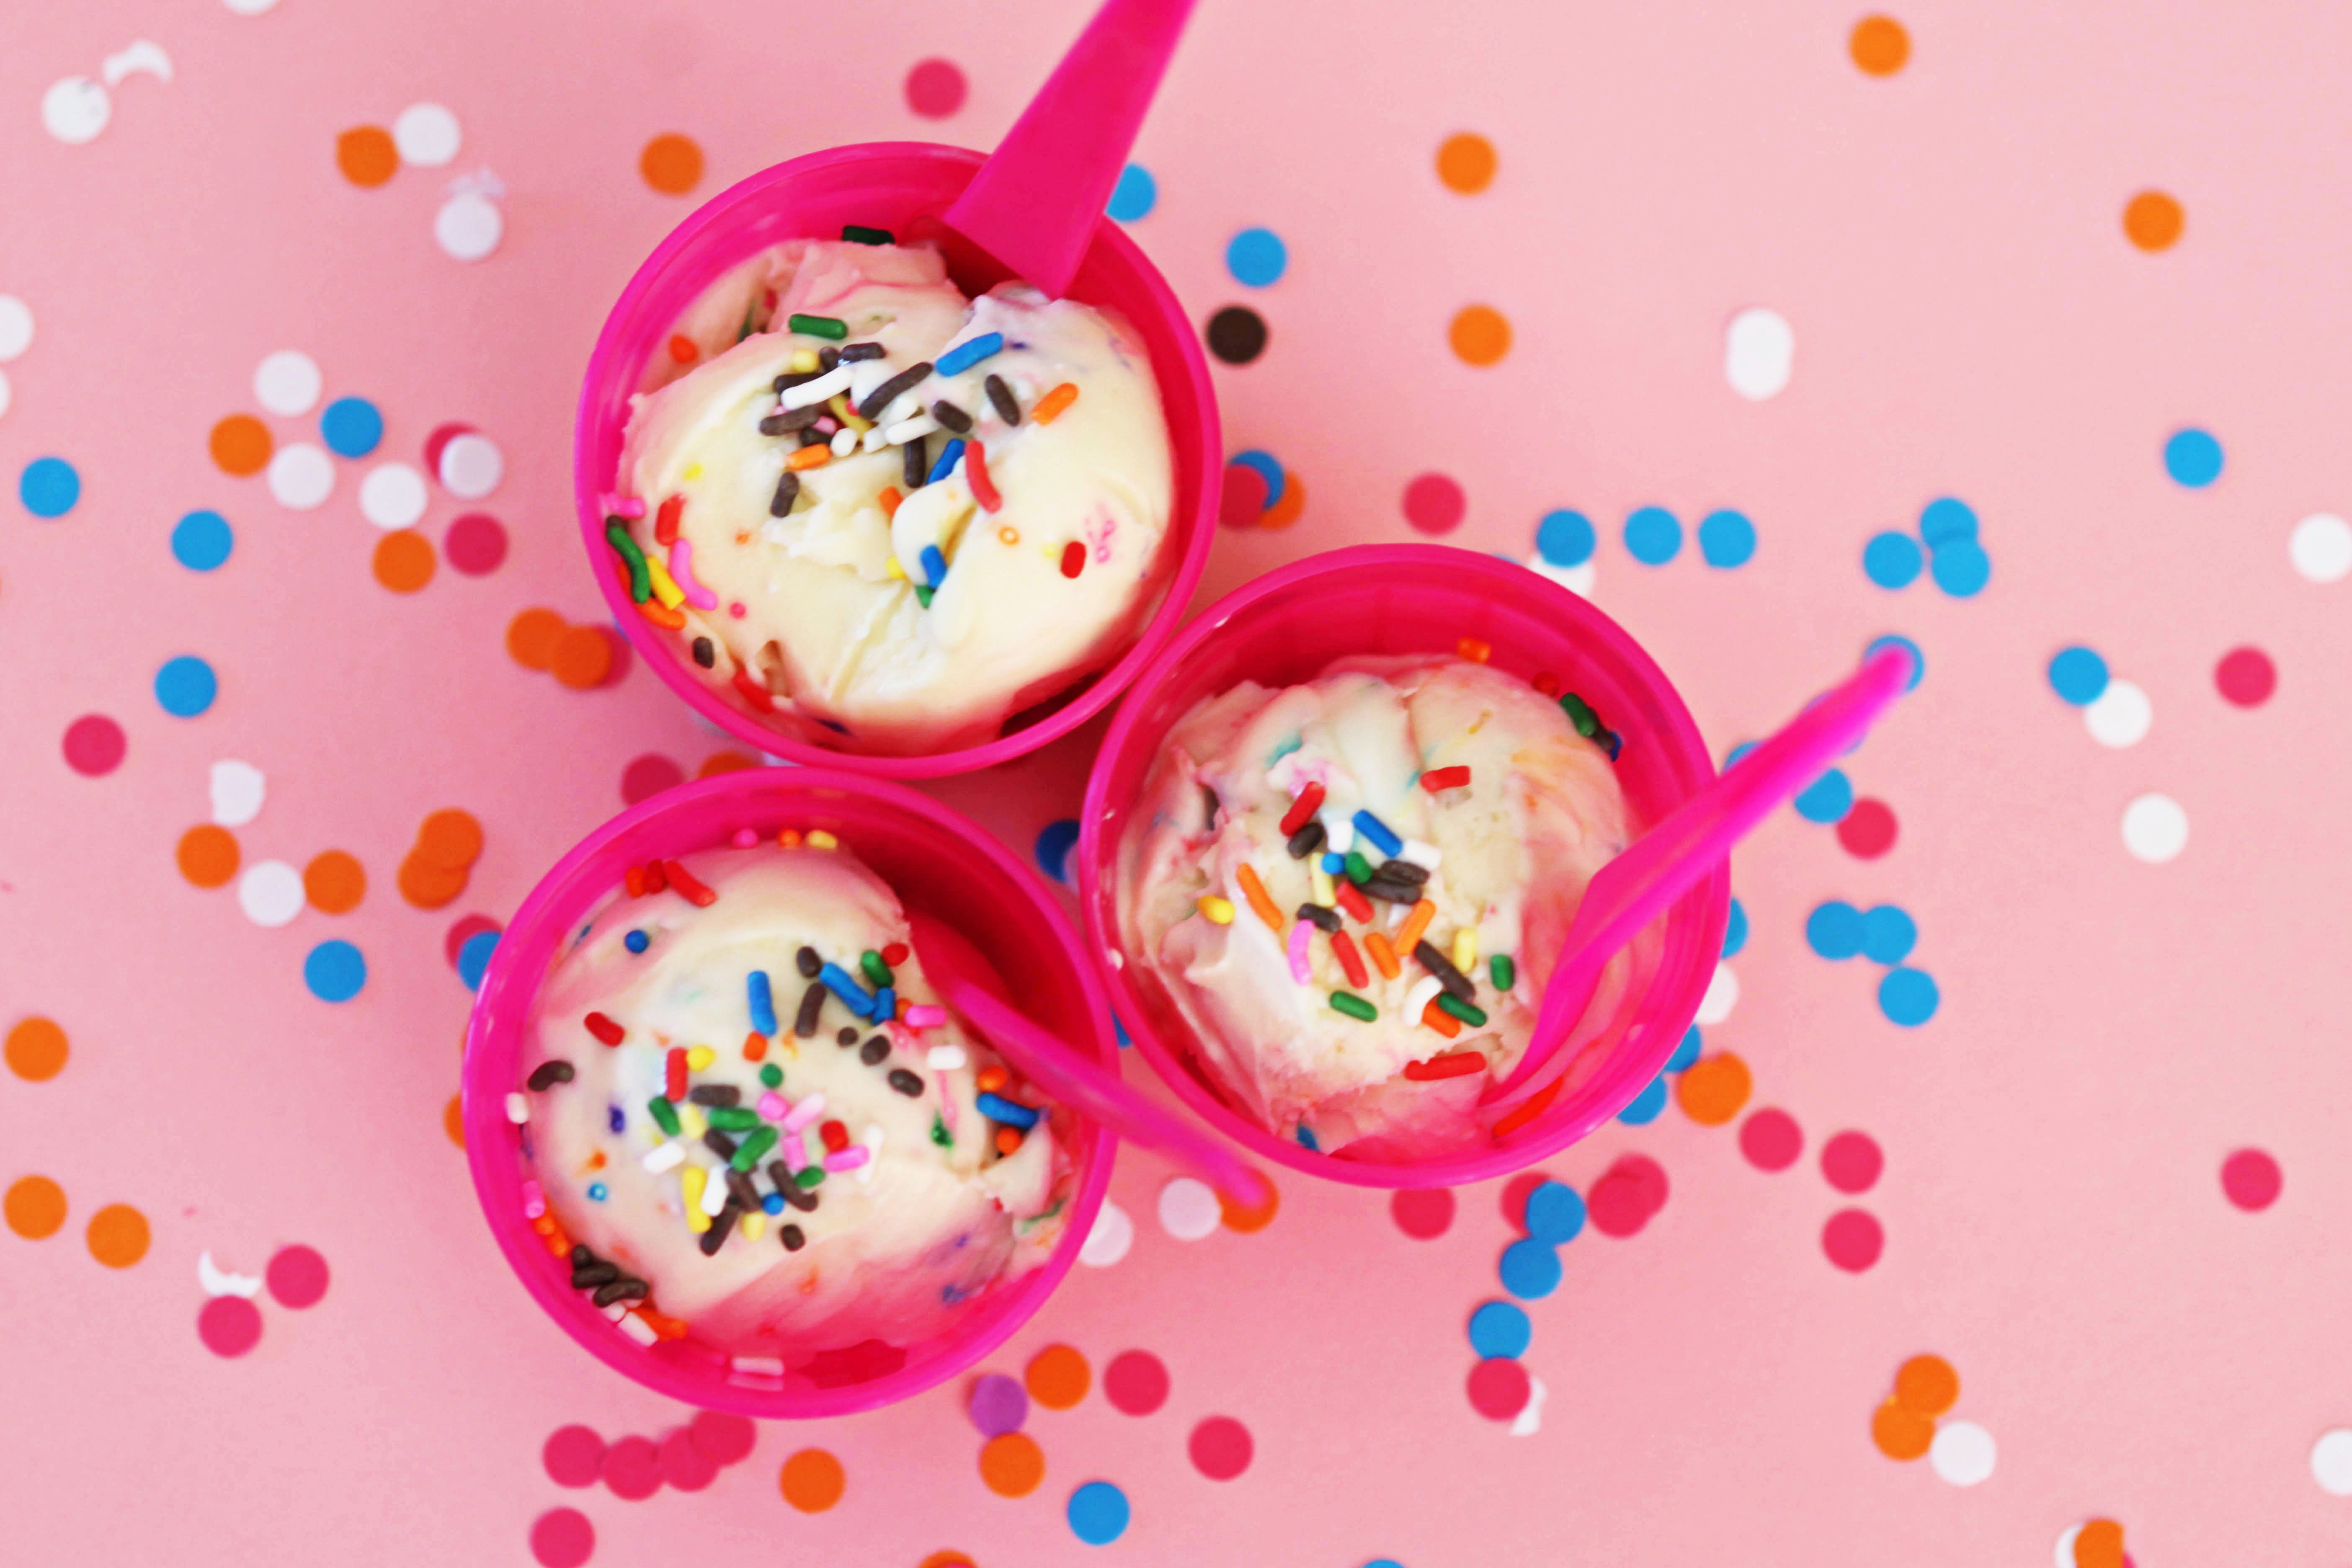 Pink bowls of vanilla ice cream with sprinkles on a pink background with confetti. - Ice cream